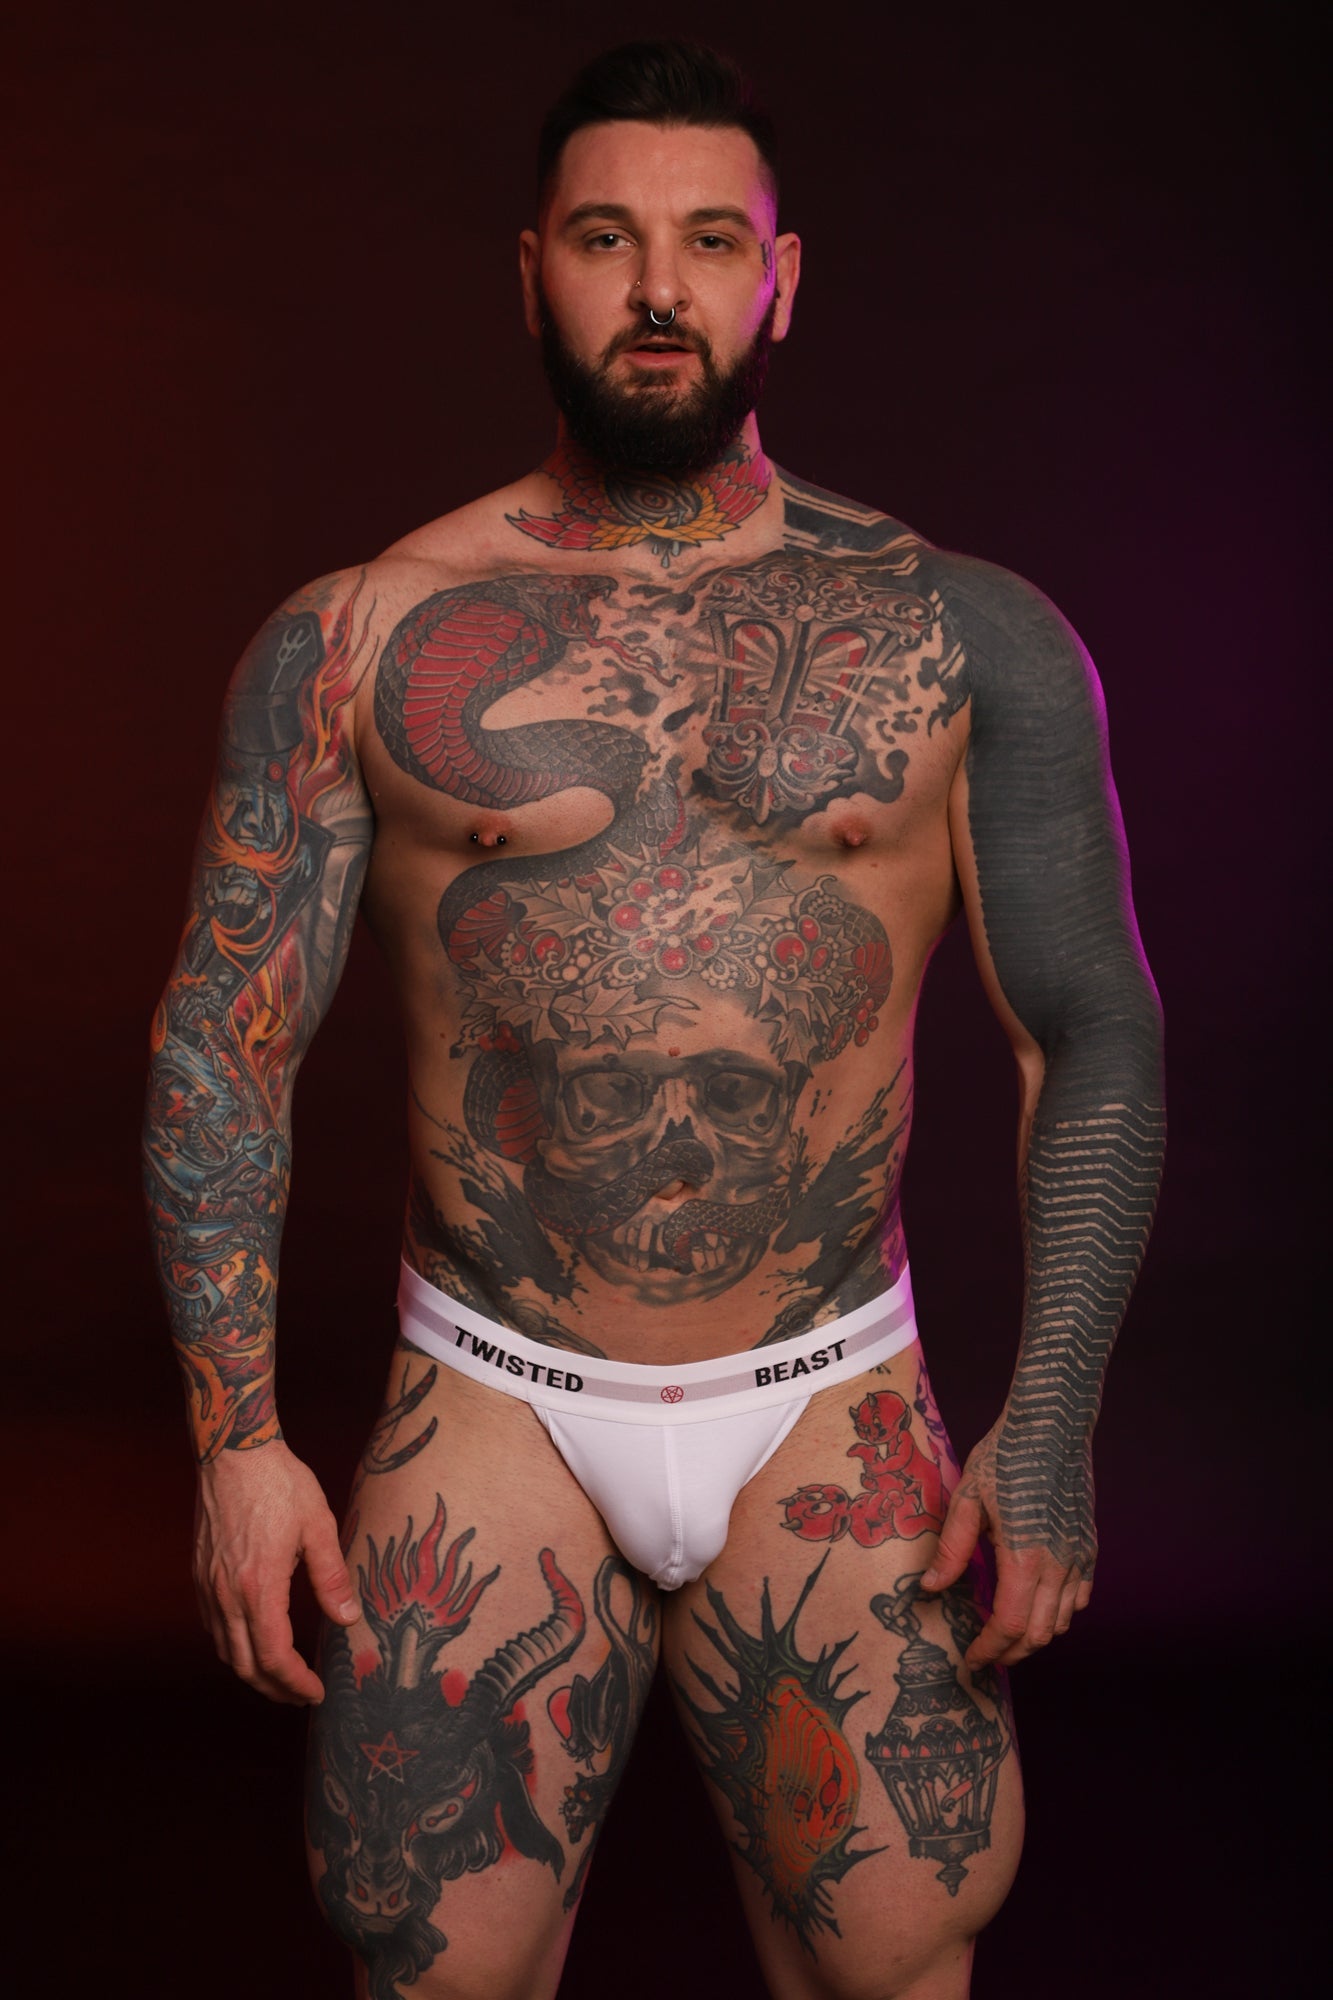 A model looking into the camera wearing a white Insignia Jock by Twisted Beast.